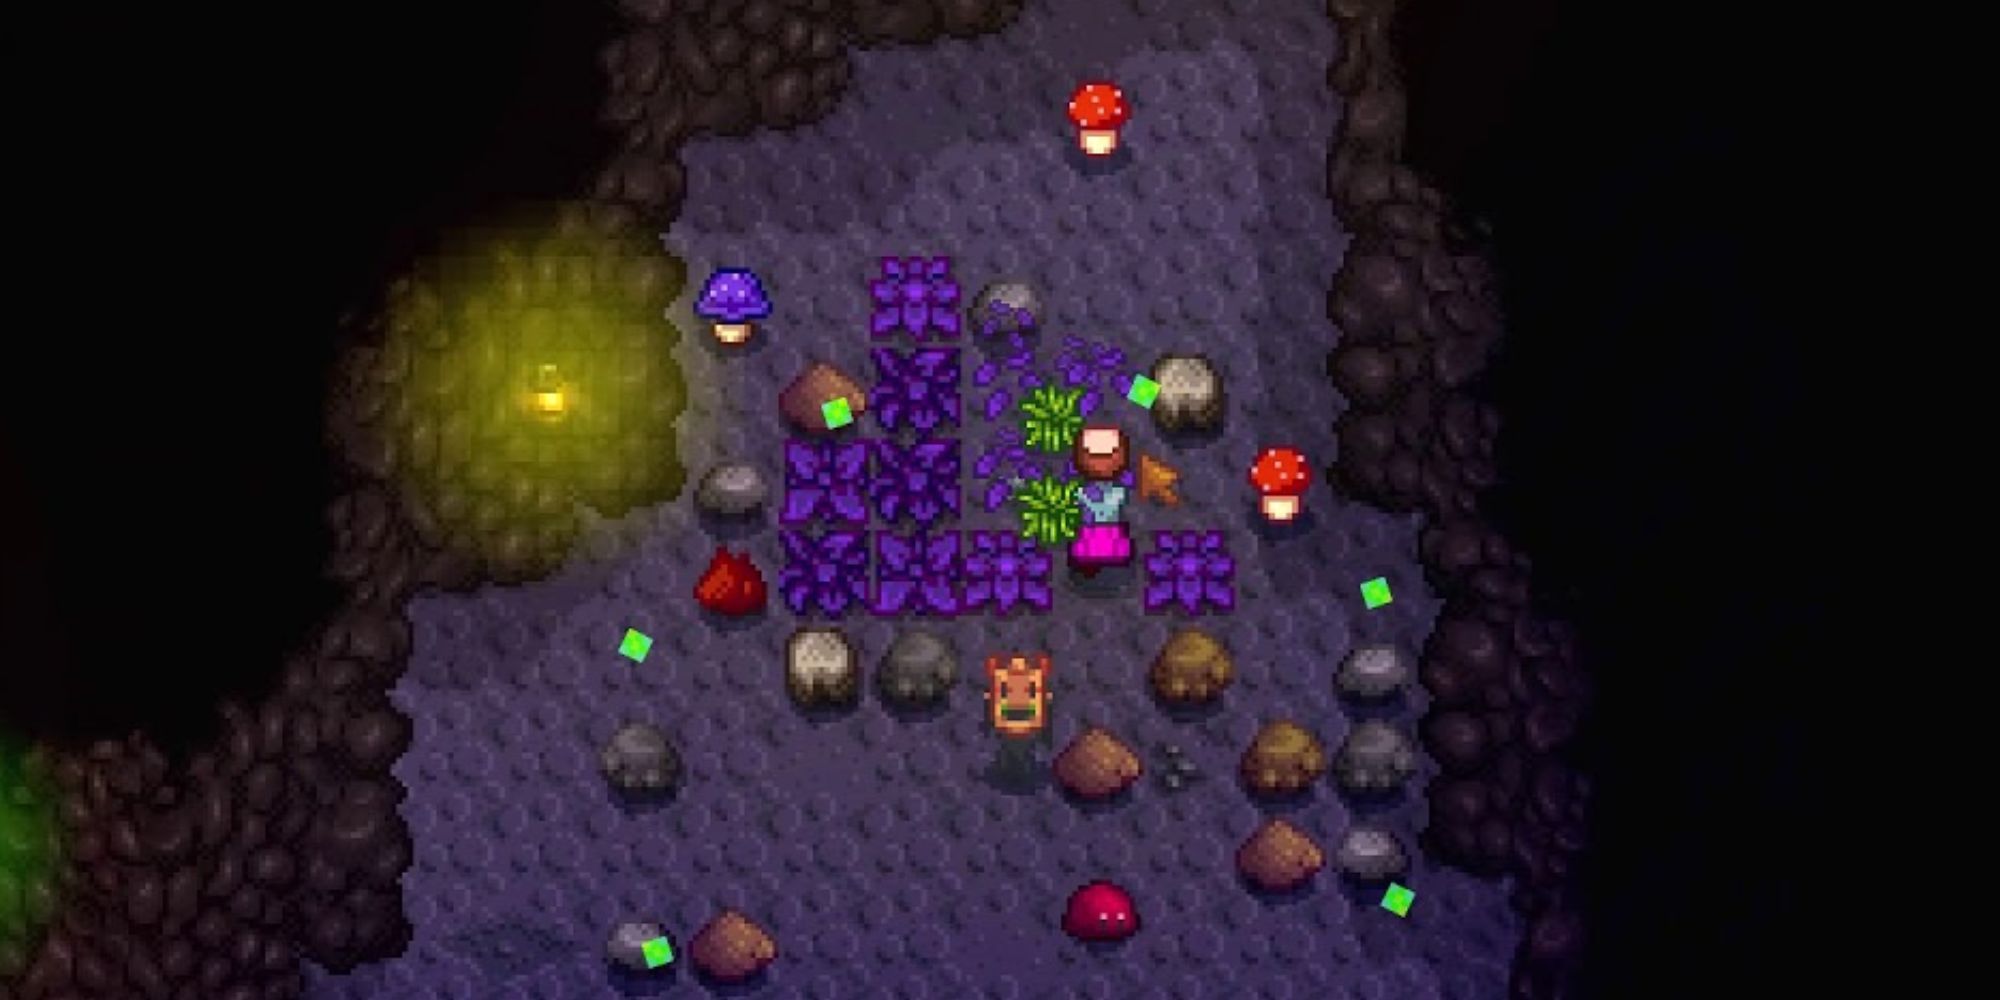 Player in the caves in Stardew Valley surrounded by mushrooms and rocks